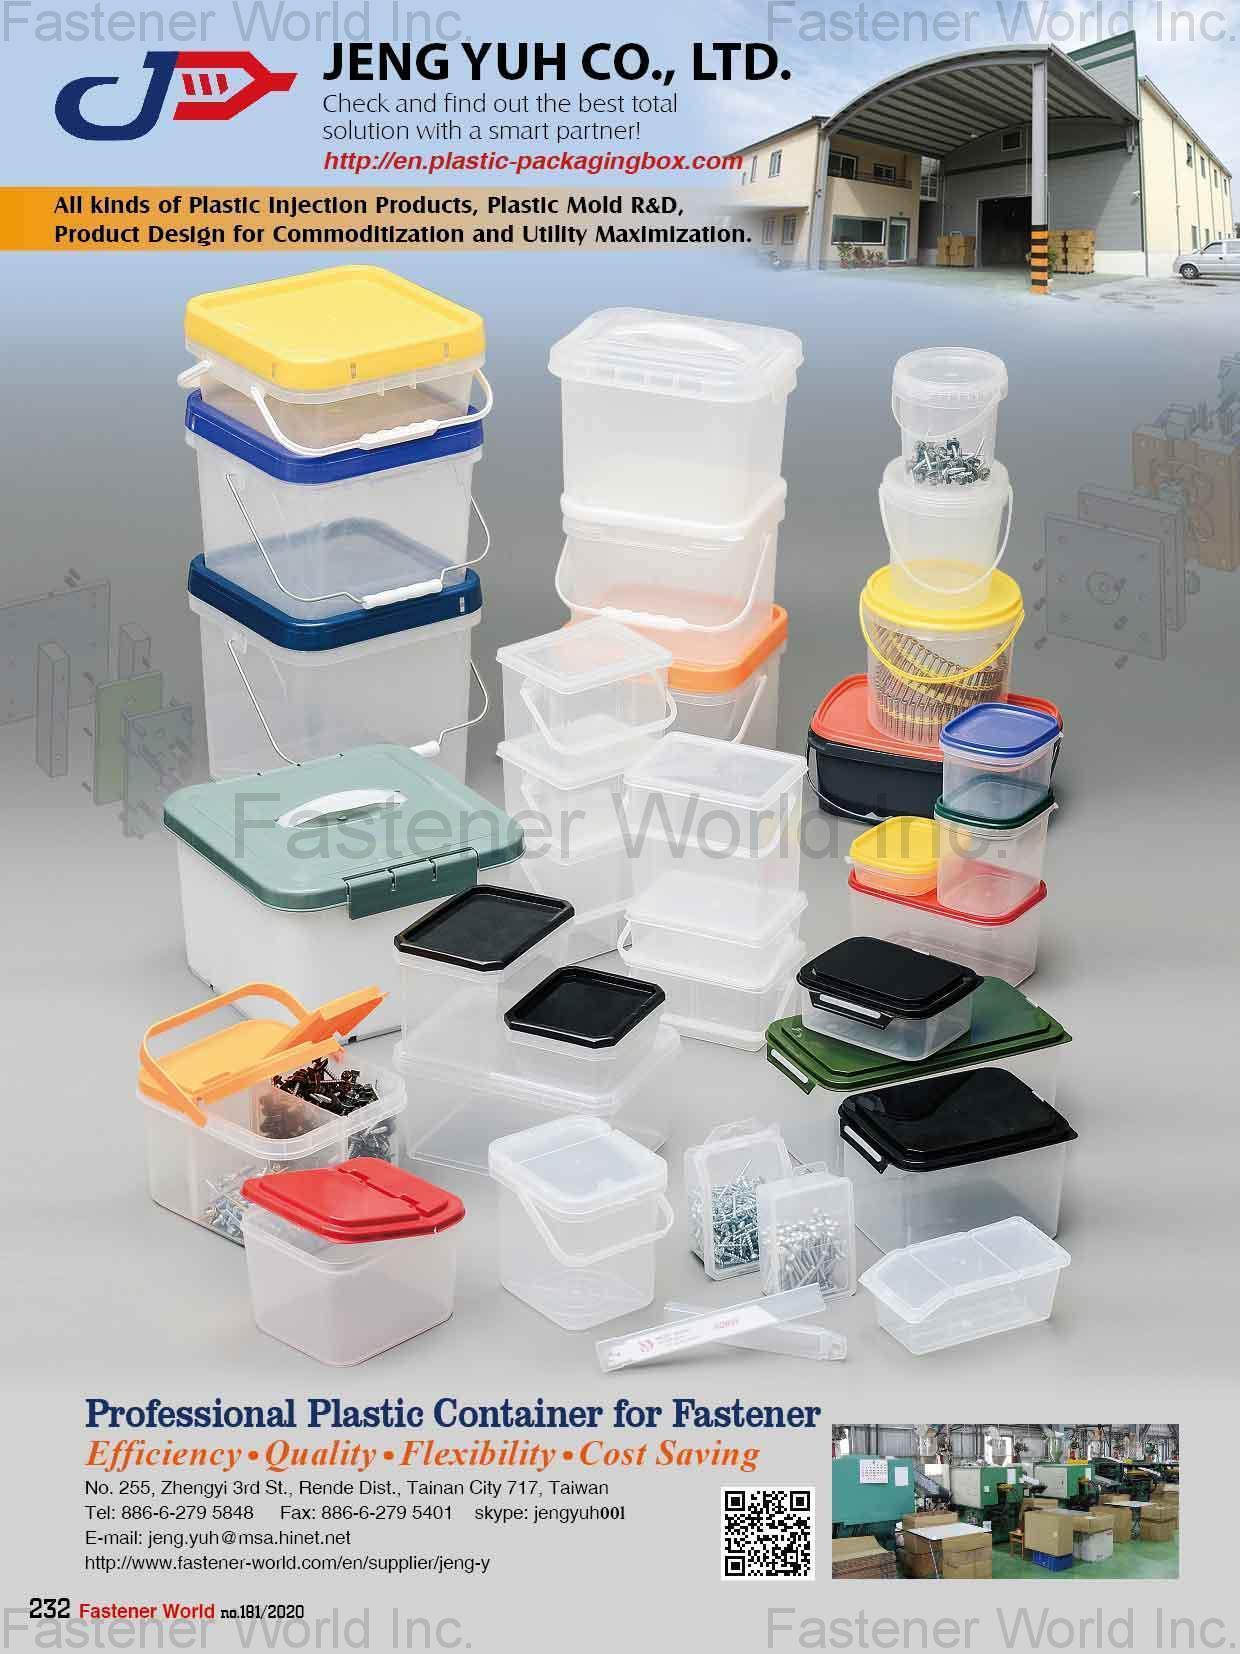 JENG YUH CO., LTD. , Plastic Injection Products, Plastic Mold R&D